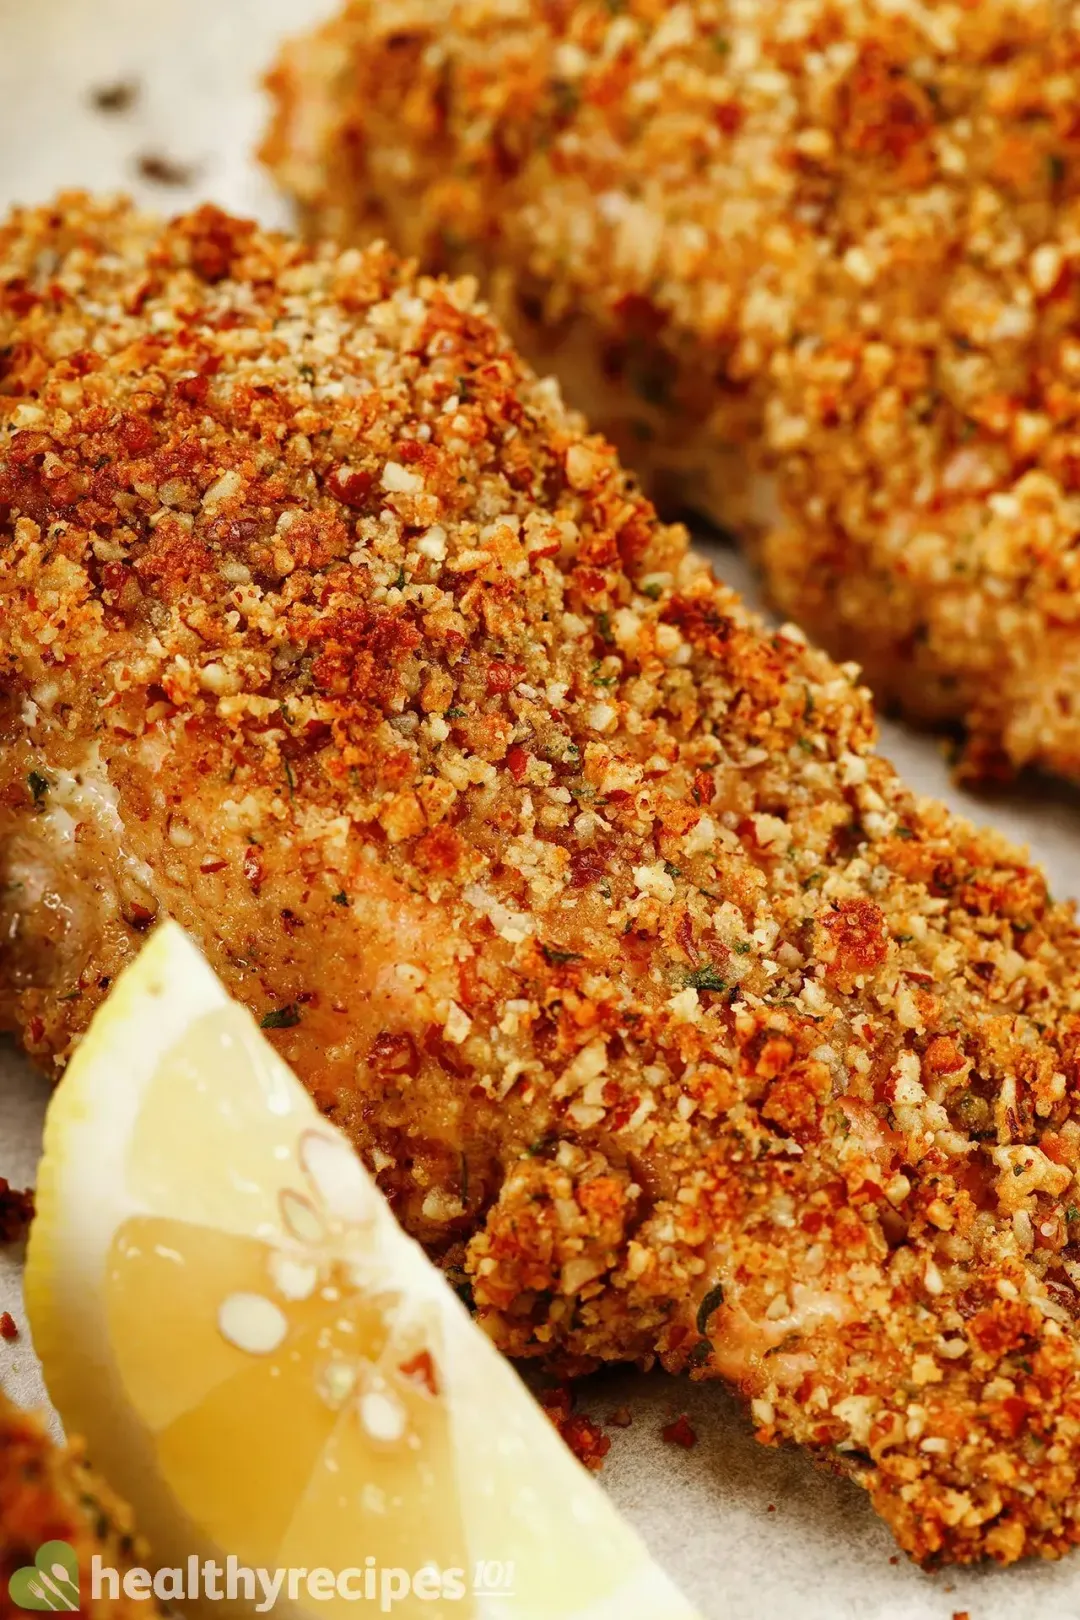 A close-up view of the outer surface of baked pecan-crusted salmon filets, with a lemon slice on the side.